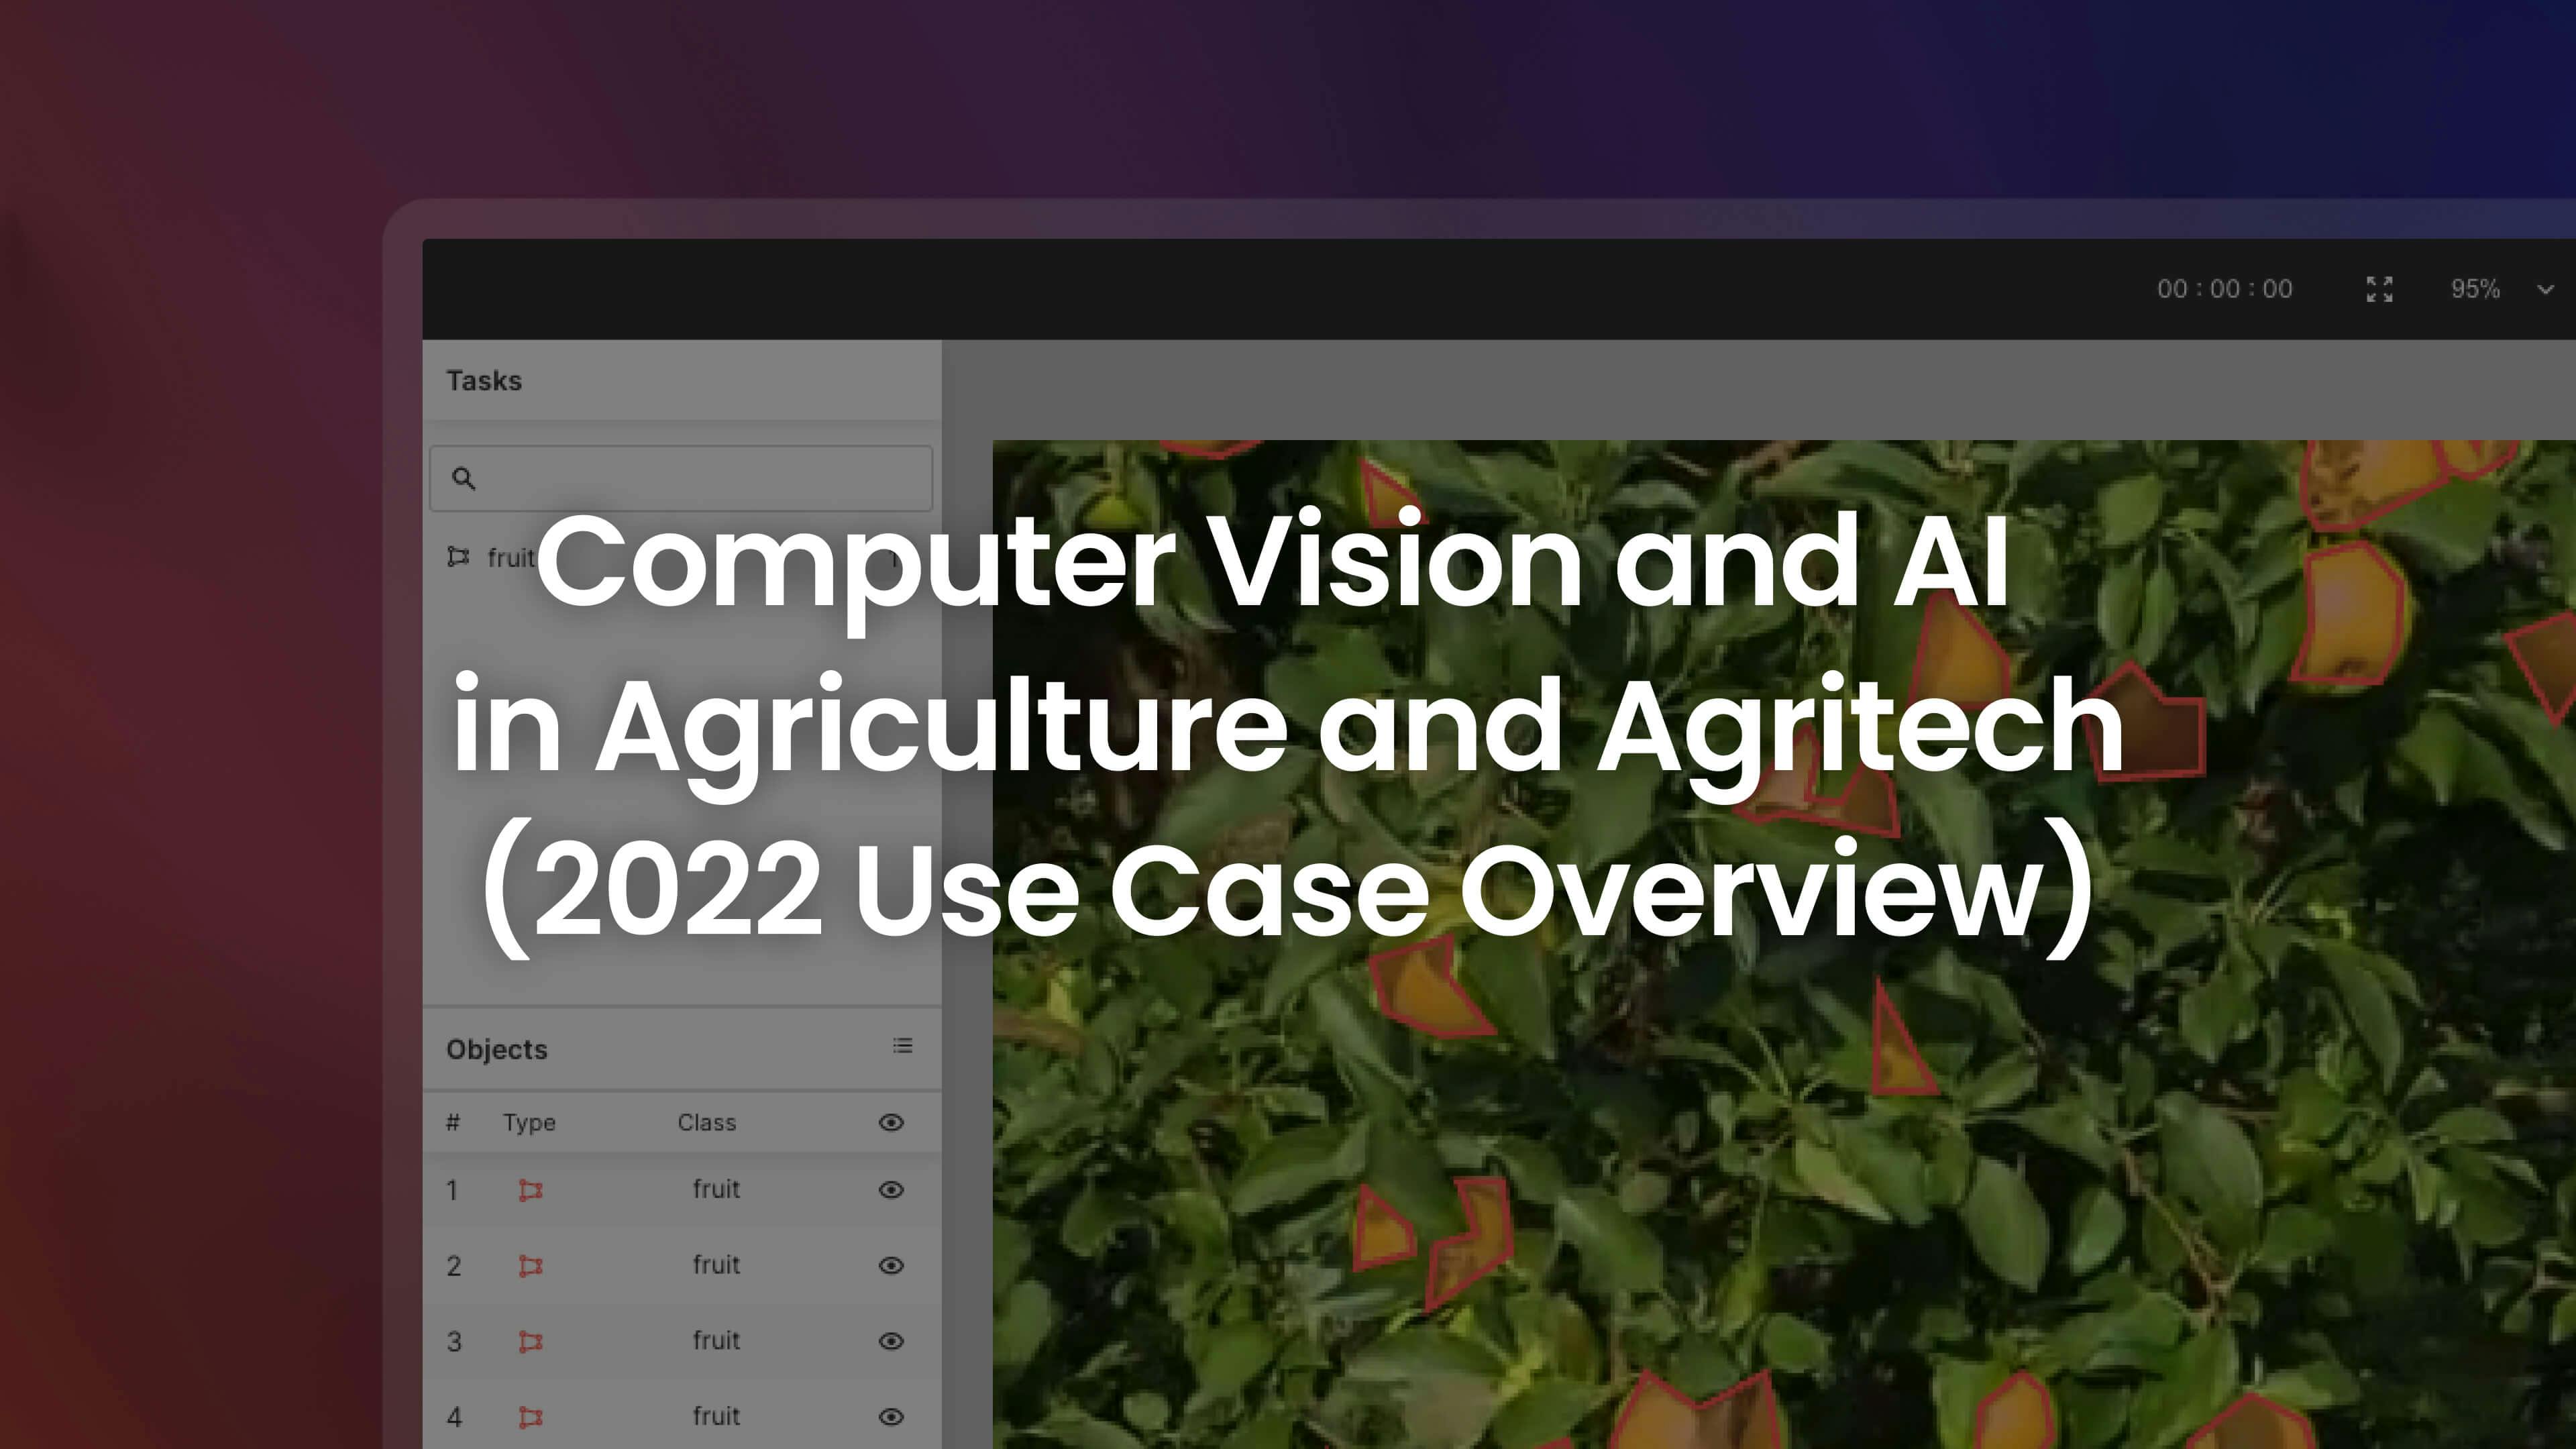 Cover image of case overview on computer vision and AI for agriculture.